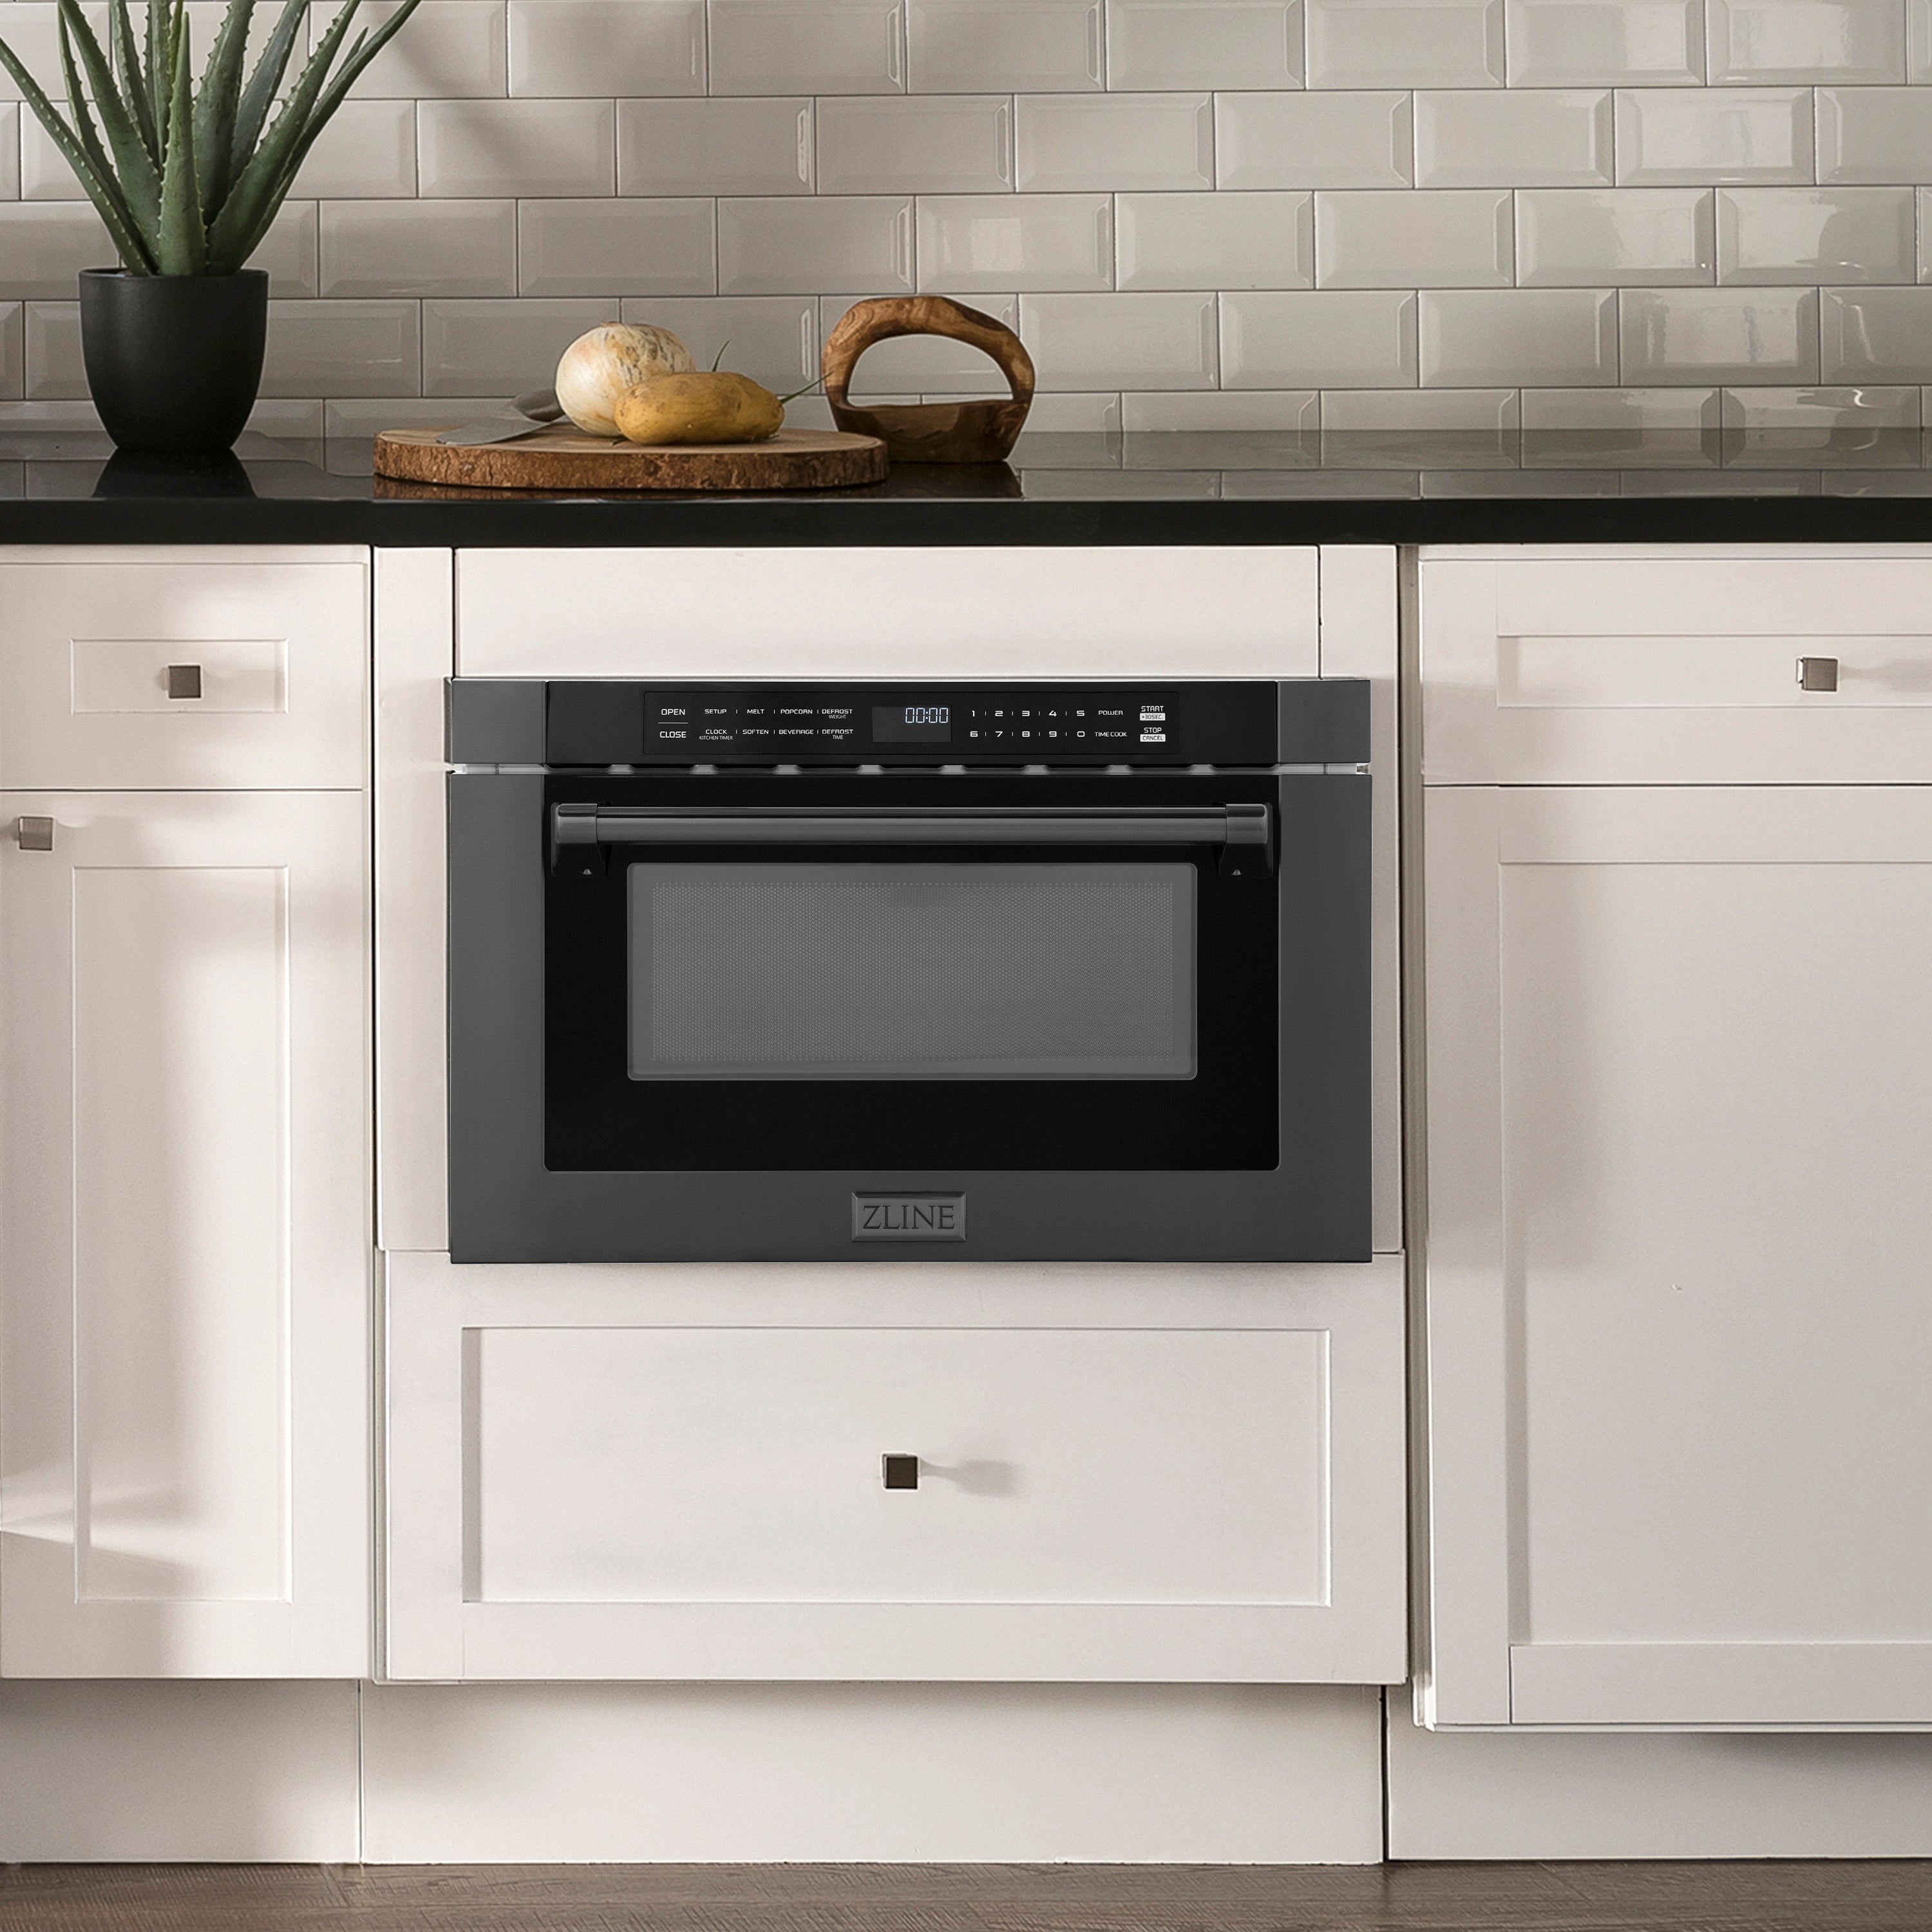 ZLINE 24" 1.2 cu. ft. Built-in Microwave Drawer with a Traditional Handle in Black Stainless Steel